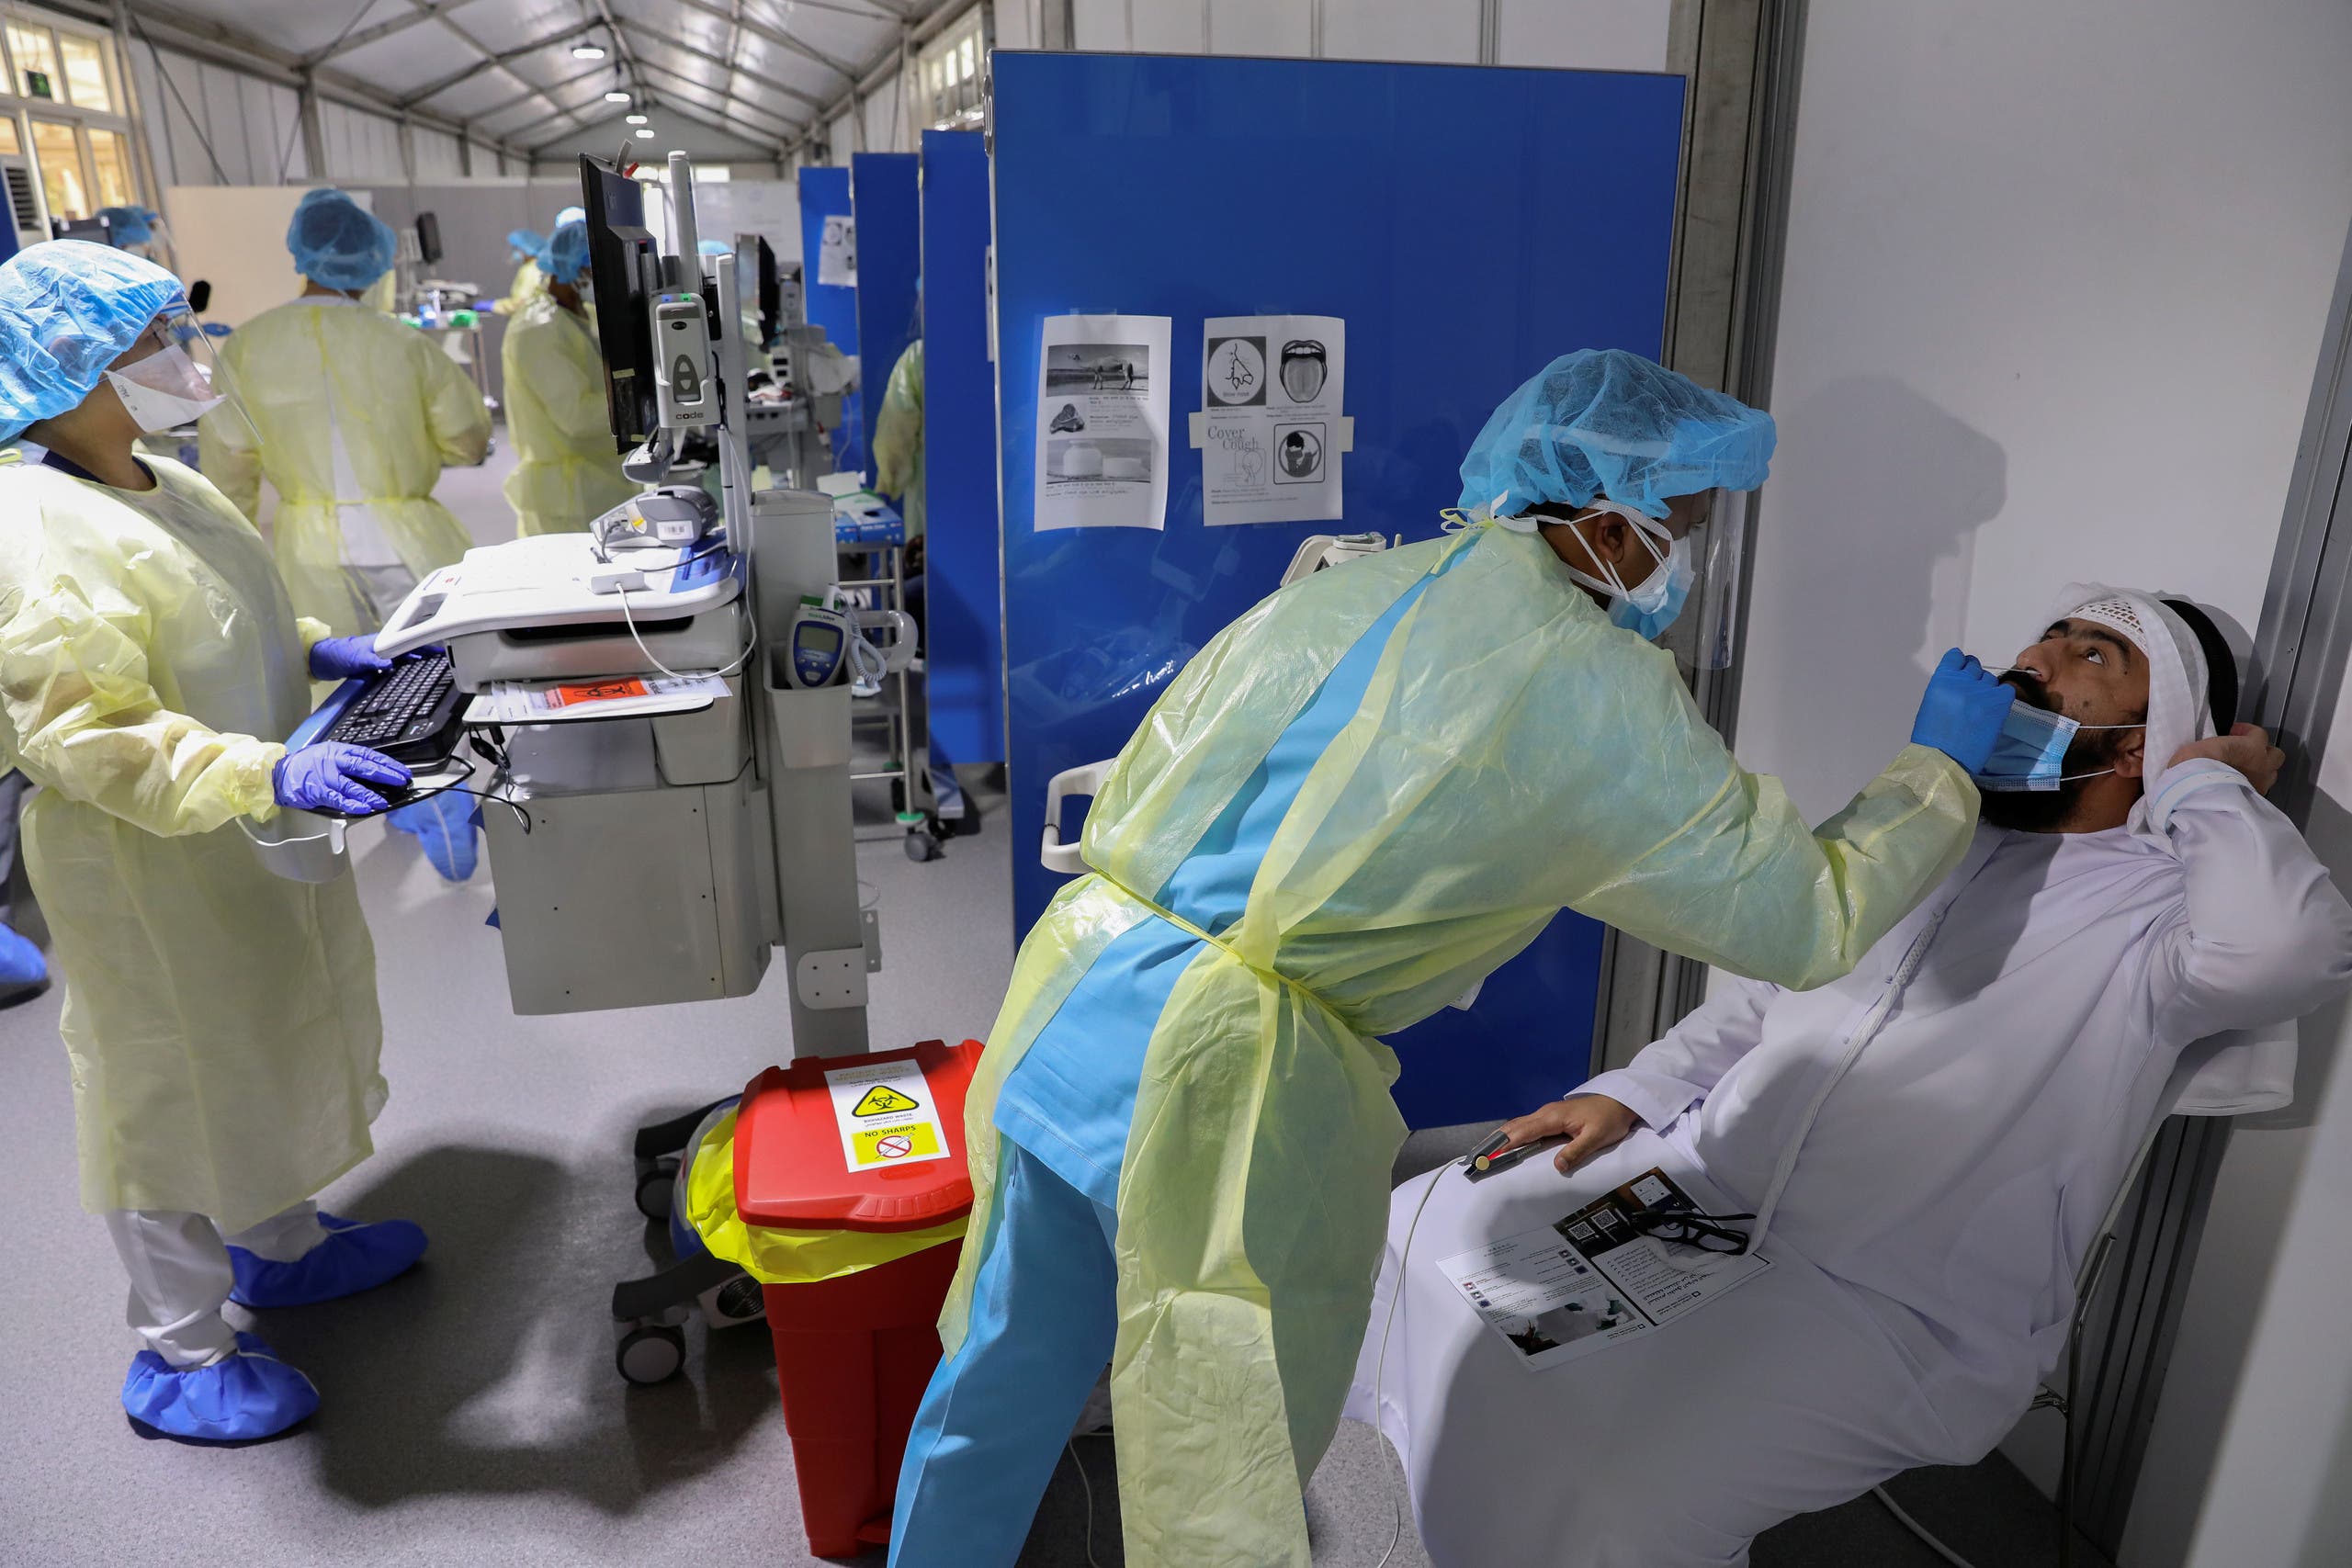 A medical worker wearing protective equipment swabs a man during testing, amid the coronavirus disease (COVID-19) outbreak, at the Cleveland Clinic hospital in Abu Dhabi, United Arab Emirates, April 20, 2020. (Reuters)